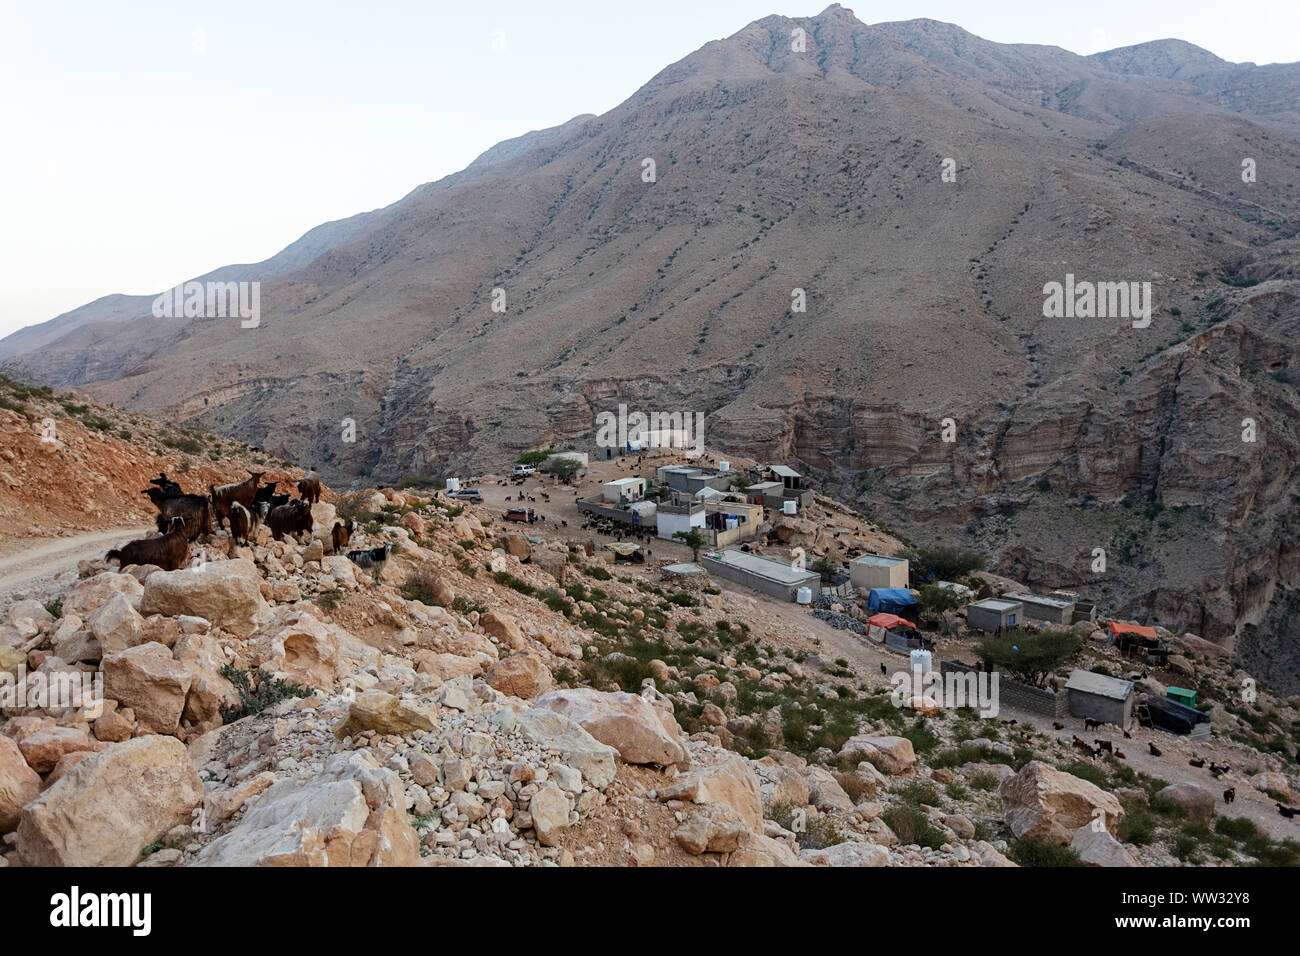 A herd of goats walking on a dirt road in a small mountain village, Oman Stock Photo